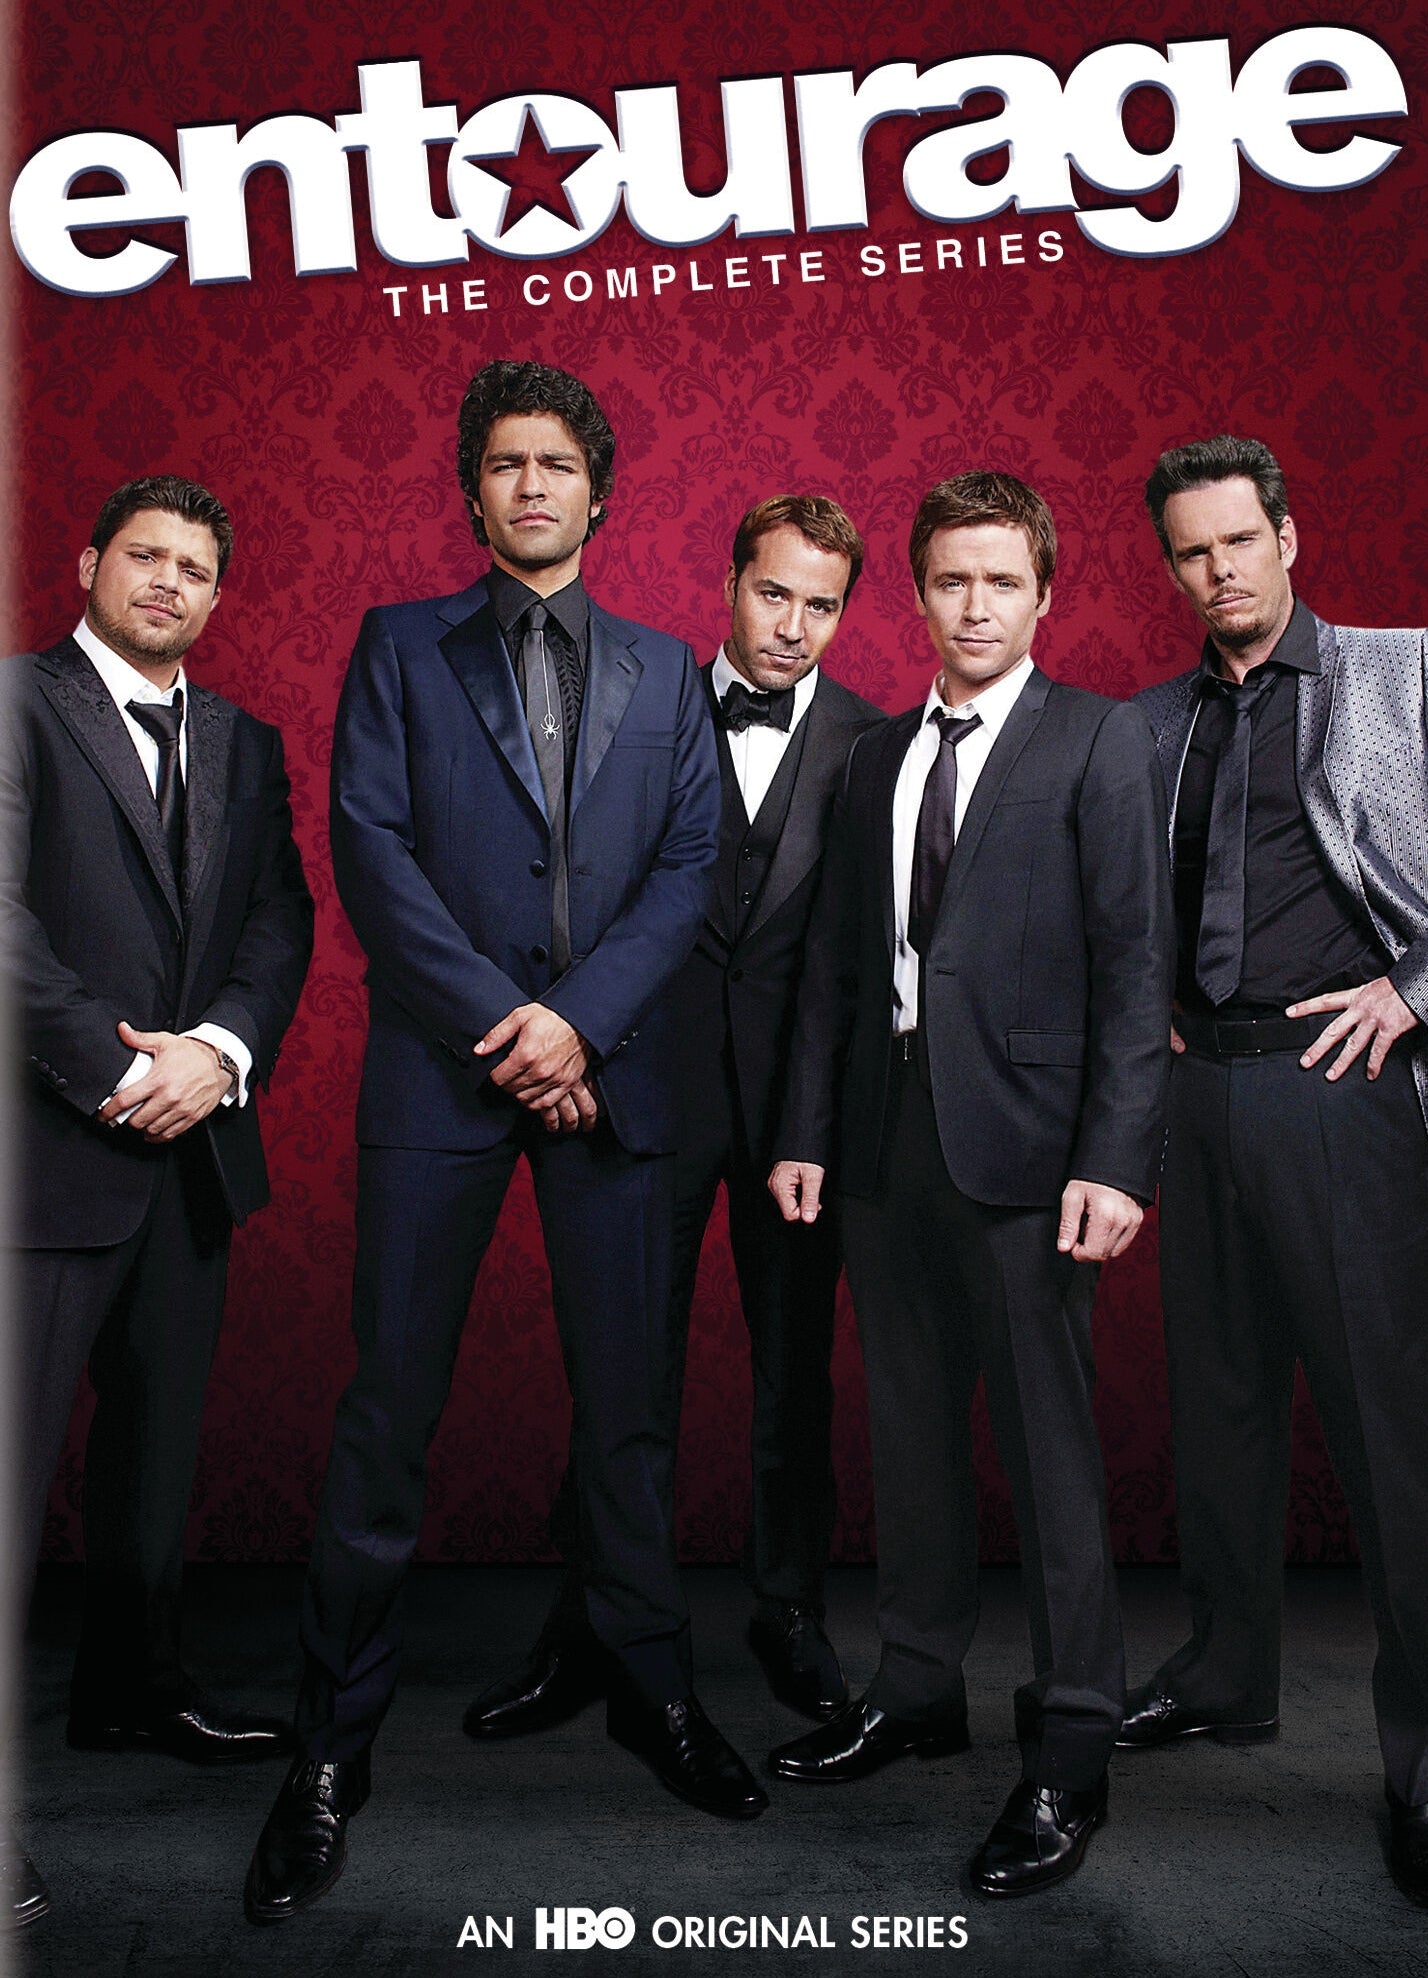 HBO's Entourage: The Complete Series Bundle (2004-2011) Vudu HD redemption only